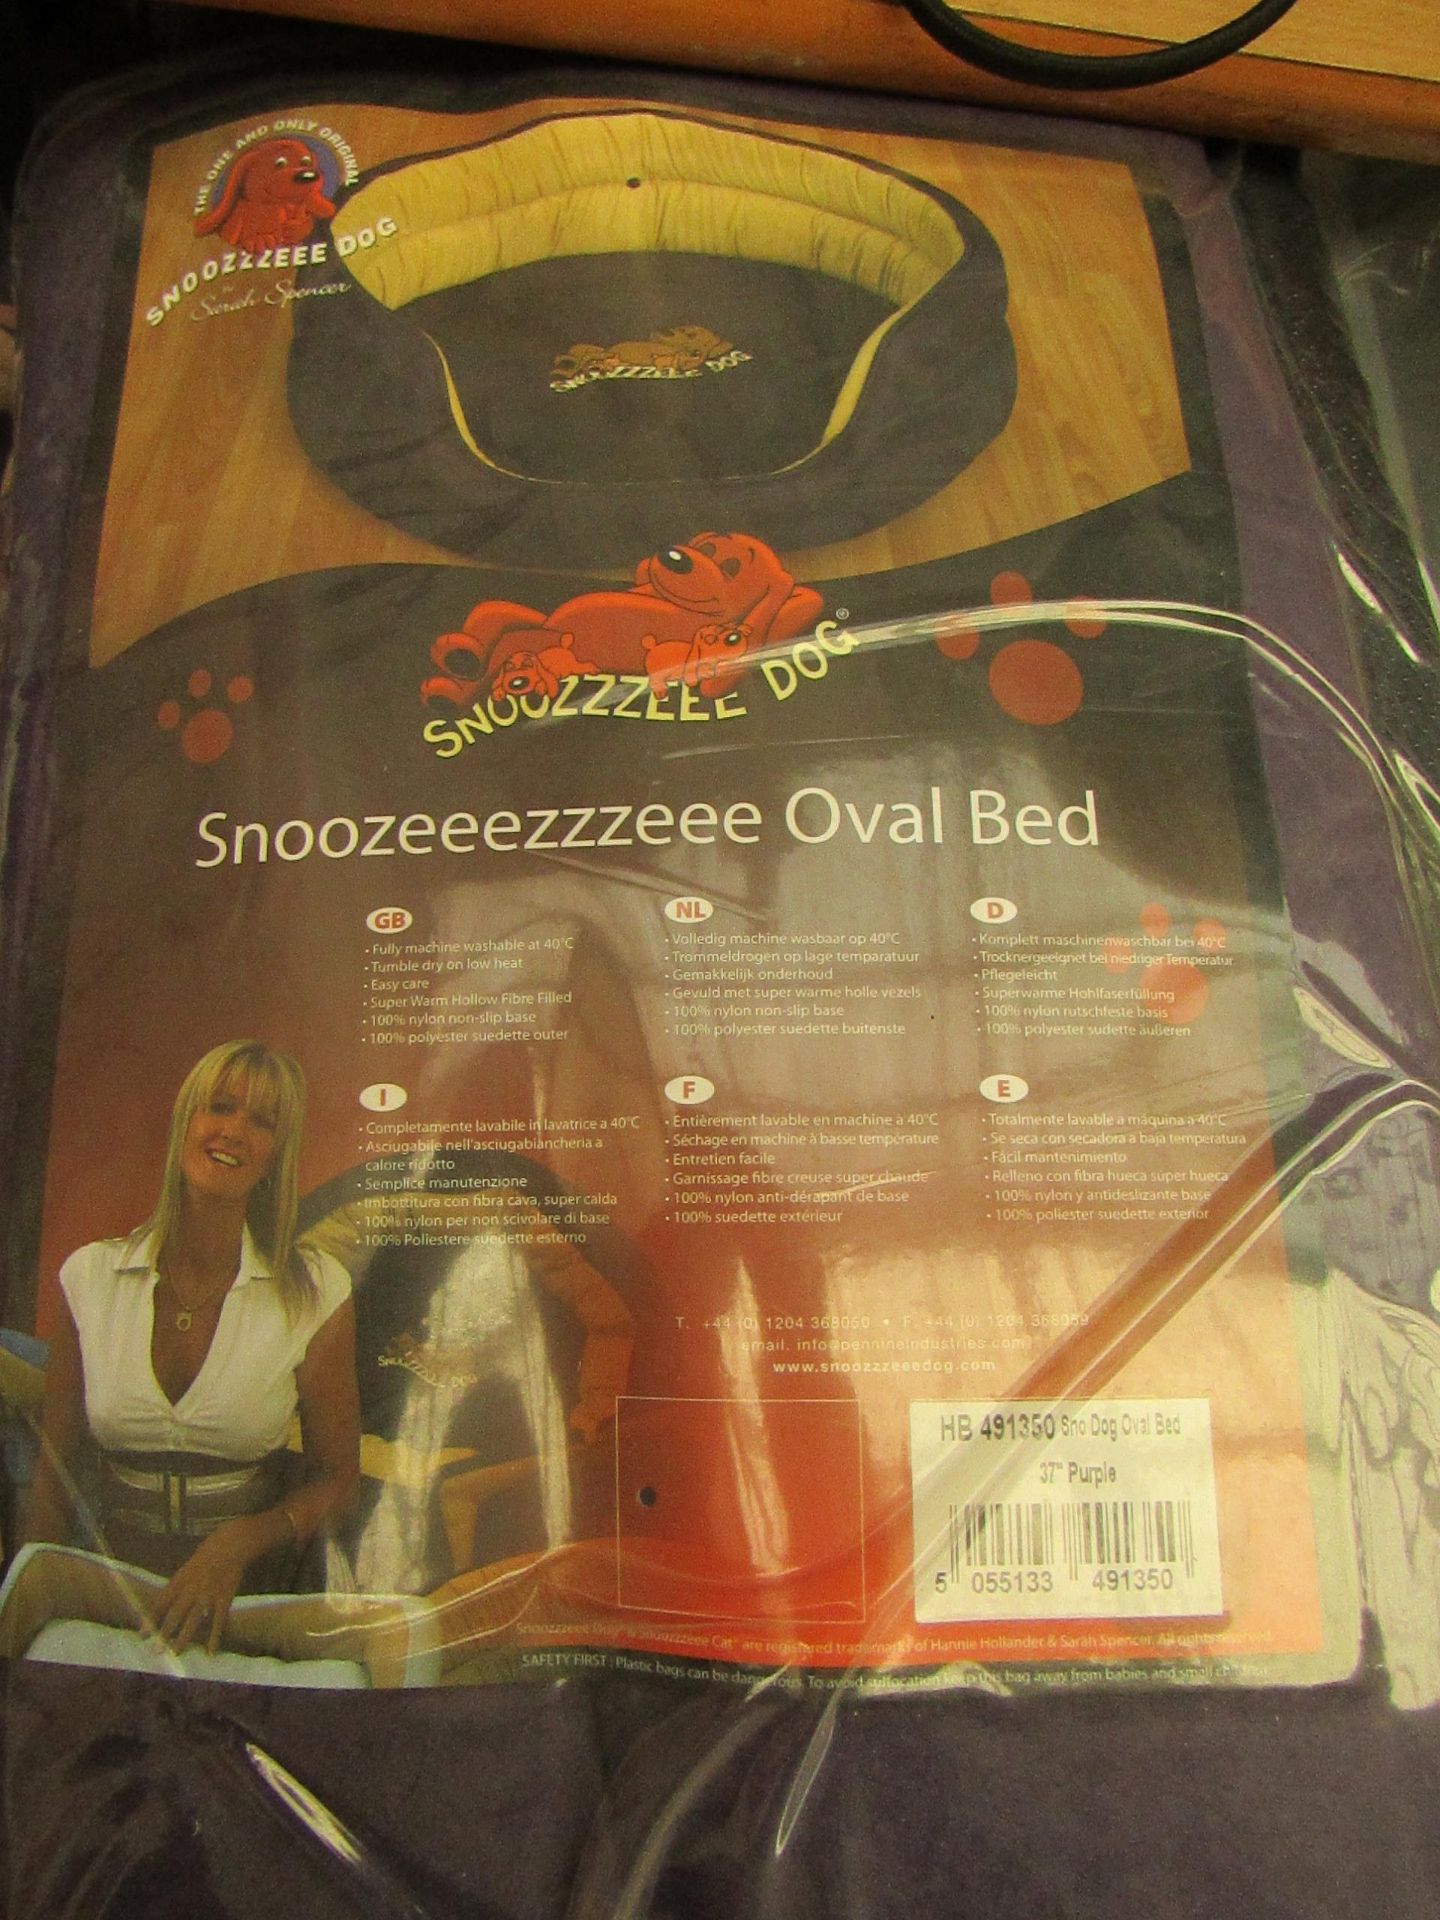 Snoozzzeee Dog - Purple Oval Dog Bed - 37" - New & Packaged.